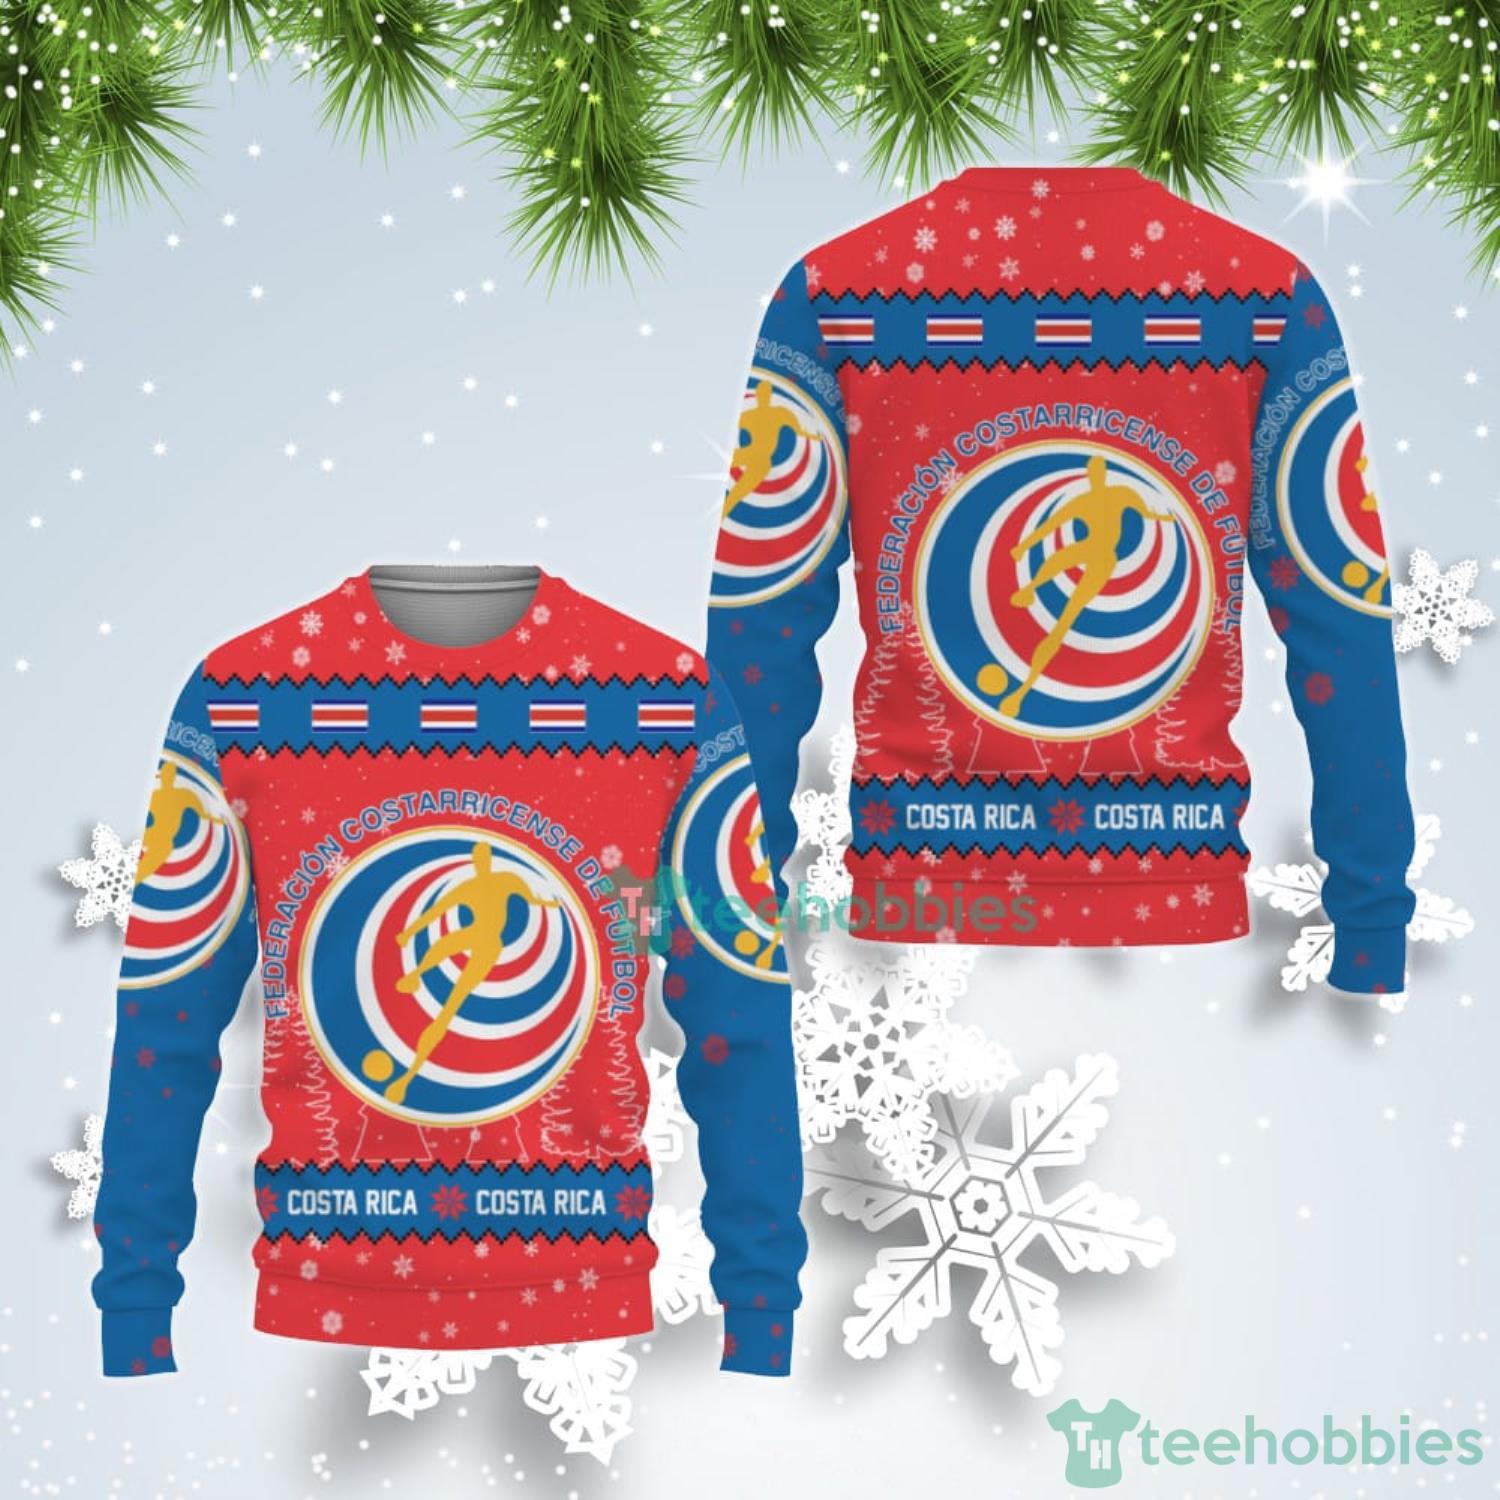 Costa Rica National Soccer Team Qatar World Cup 2022 Winter Season Ugly Christmas Sweater Product Photo 1